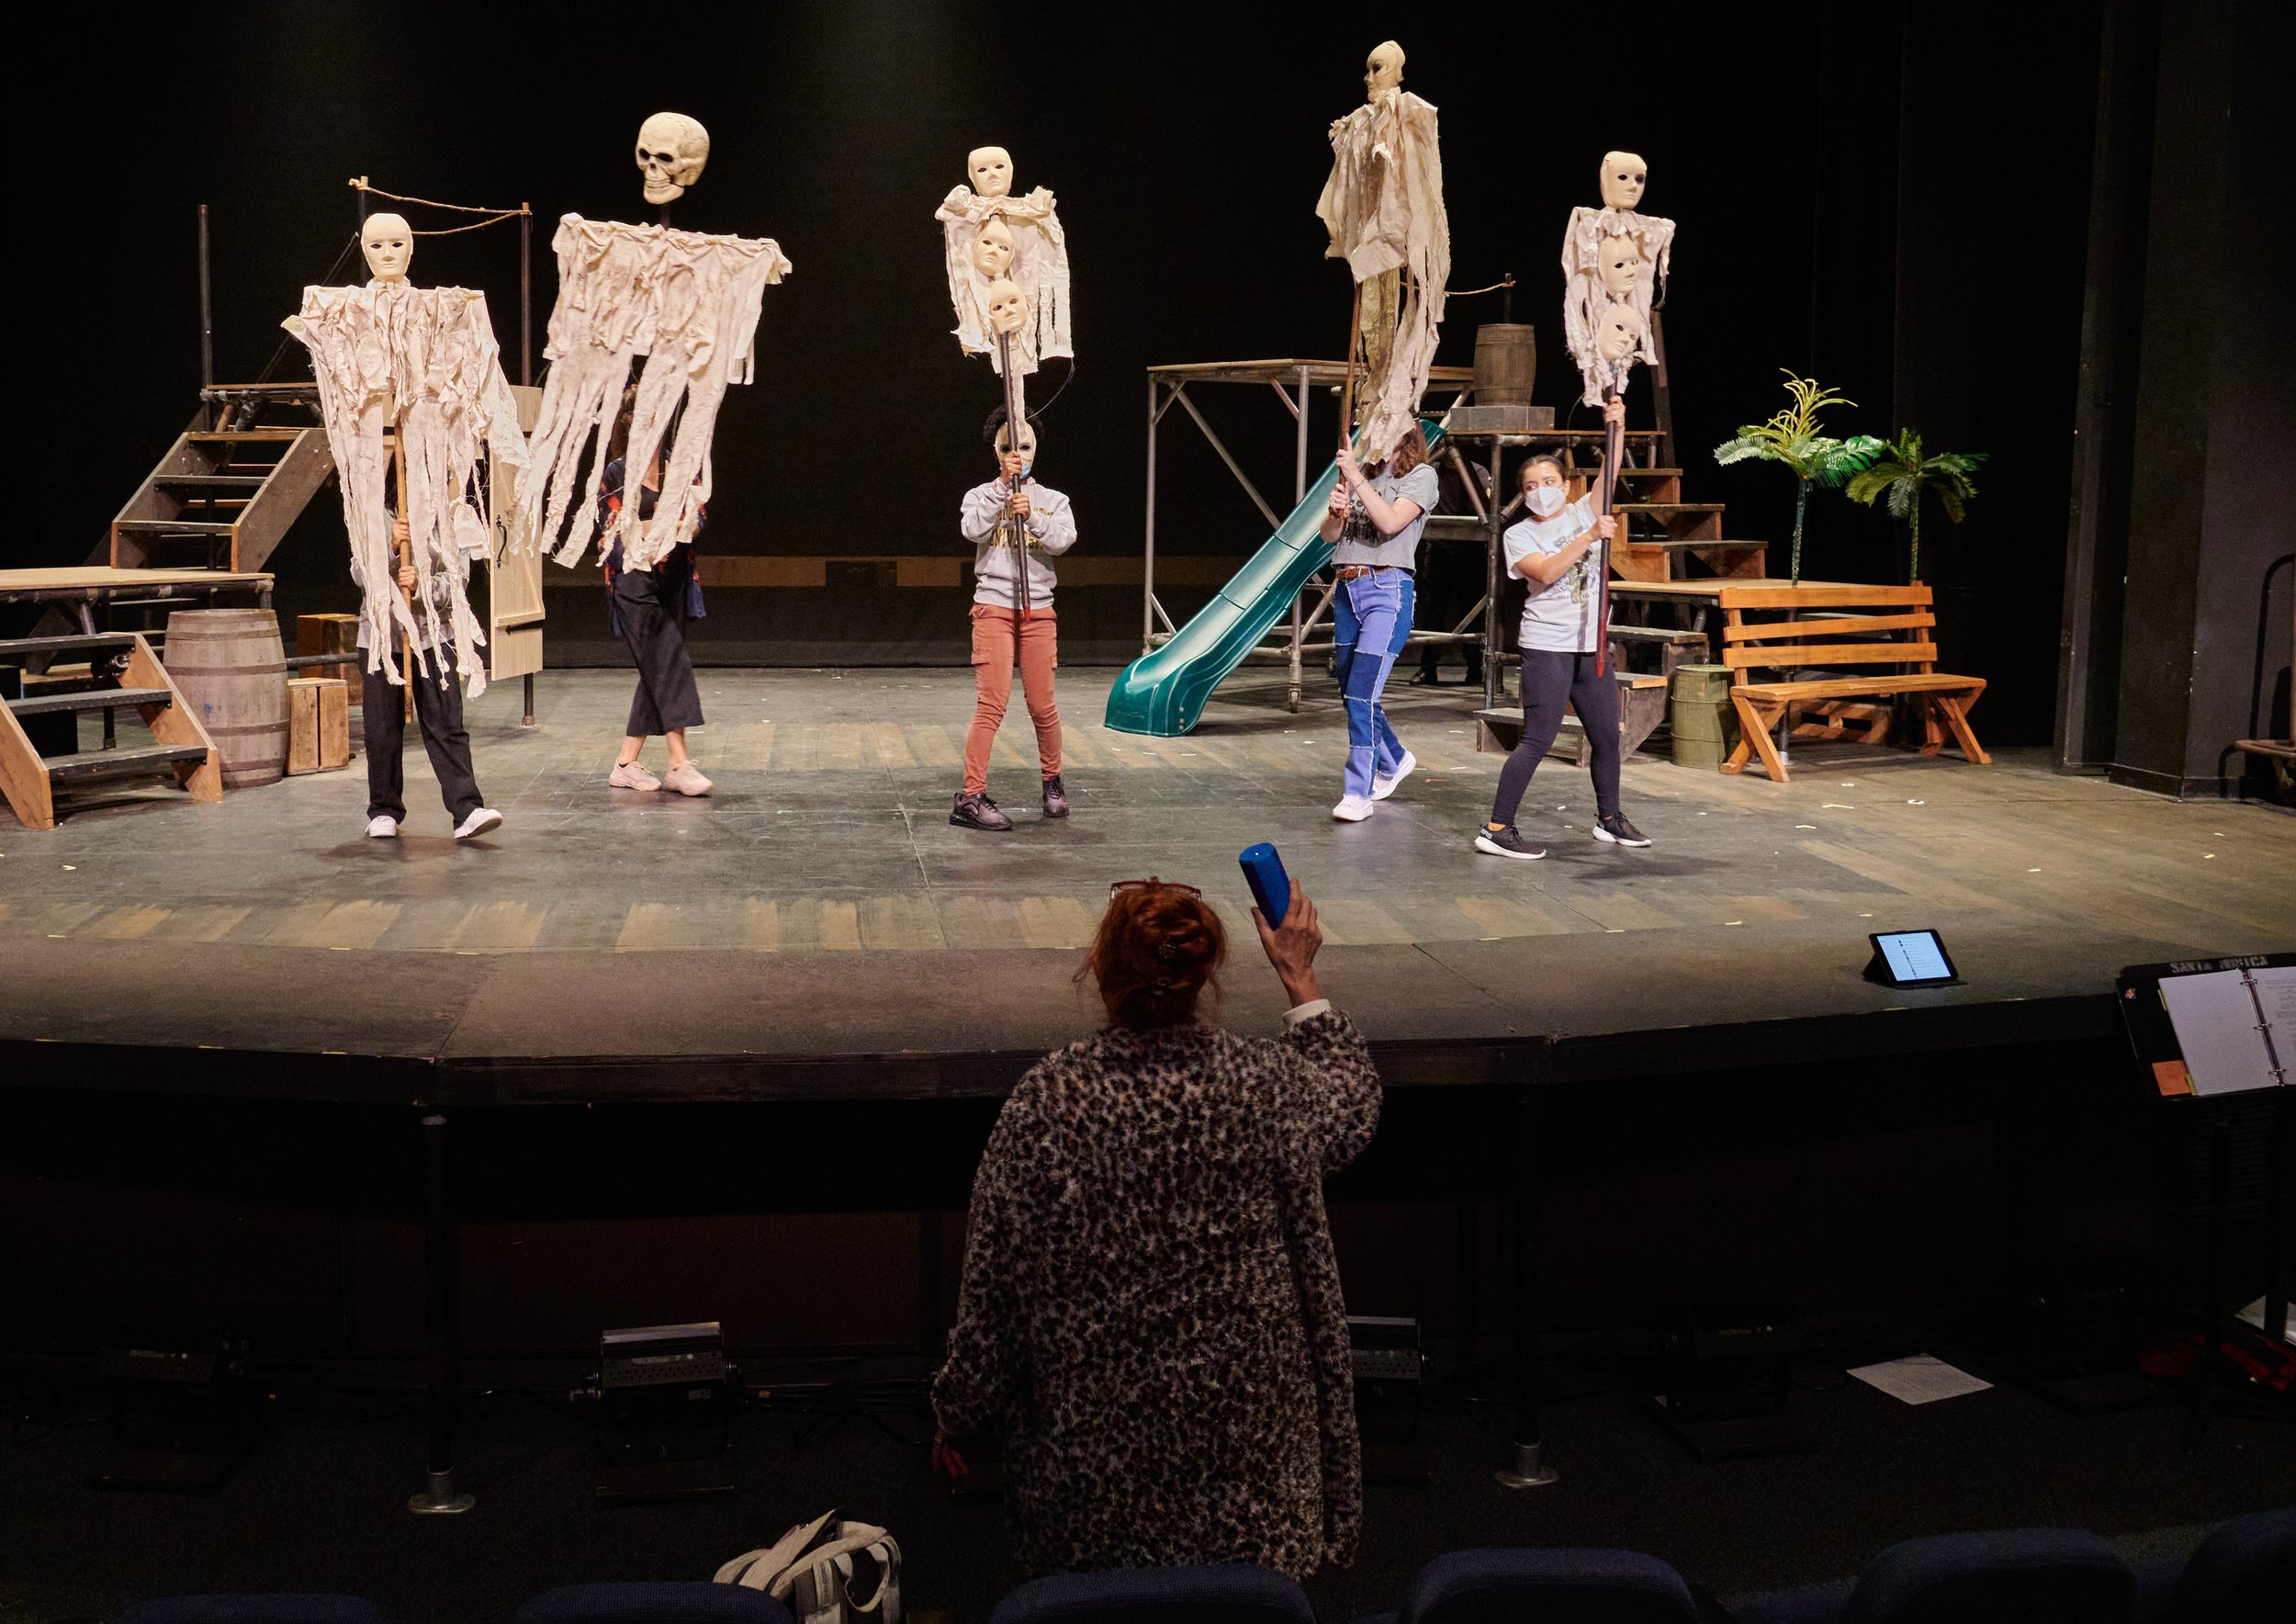  Director Terrin Adair holds up a speaker to rehearse one of the musical interludes of the Santa Monica College Theatre Arts production of "Treasure Island" at the SMC Main Stage on Wednesday, April 27, 2022, in Santa Monica, Calif. (Nicholas McCall 